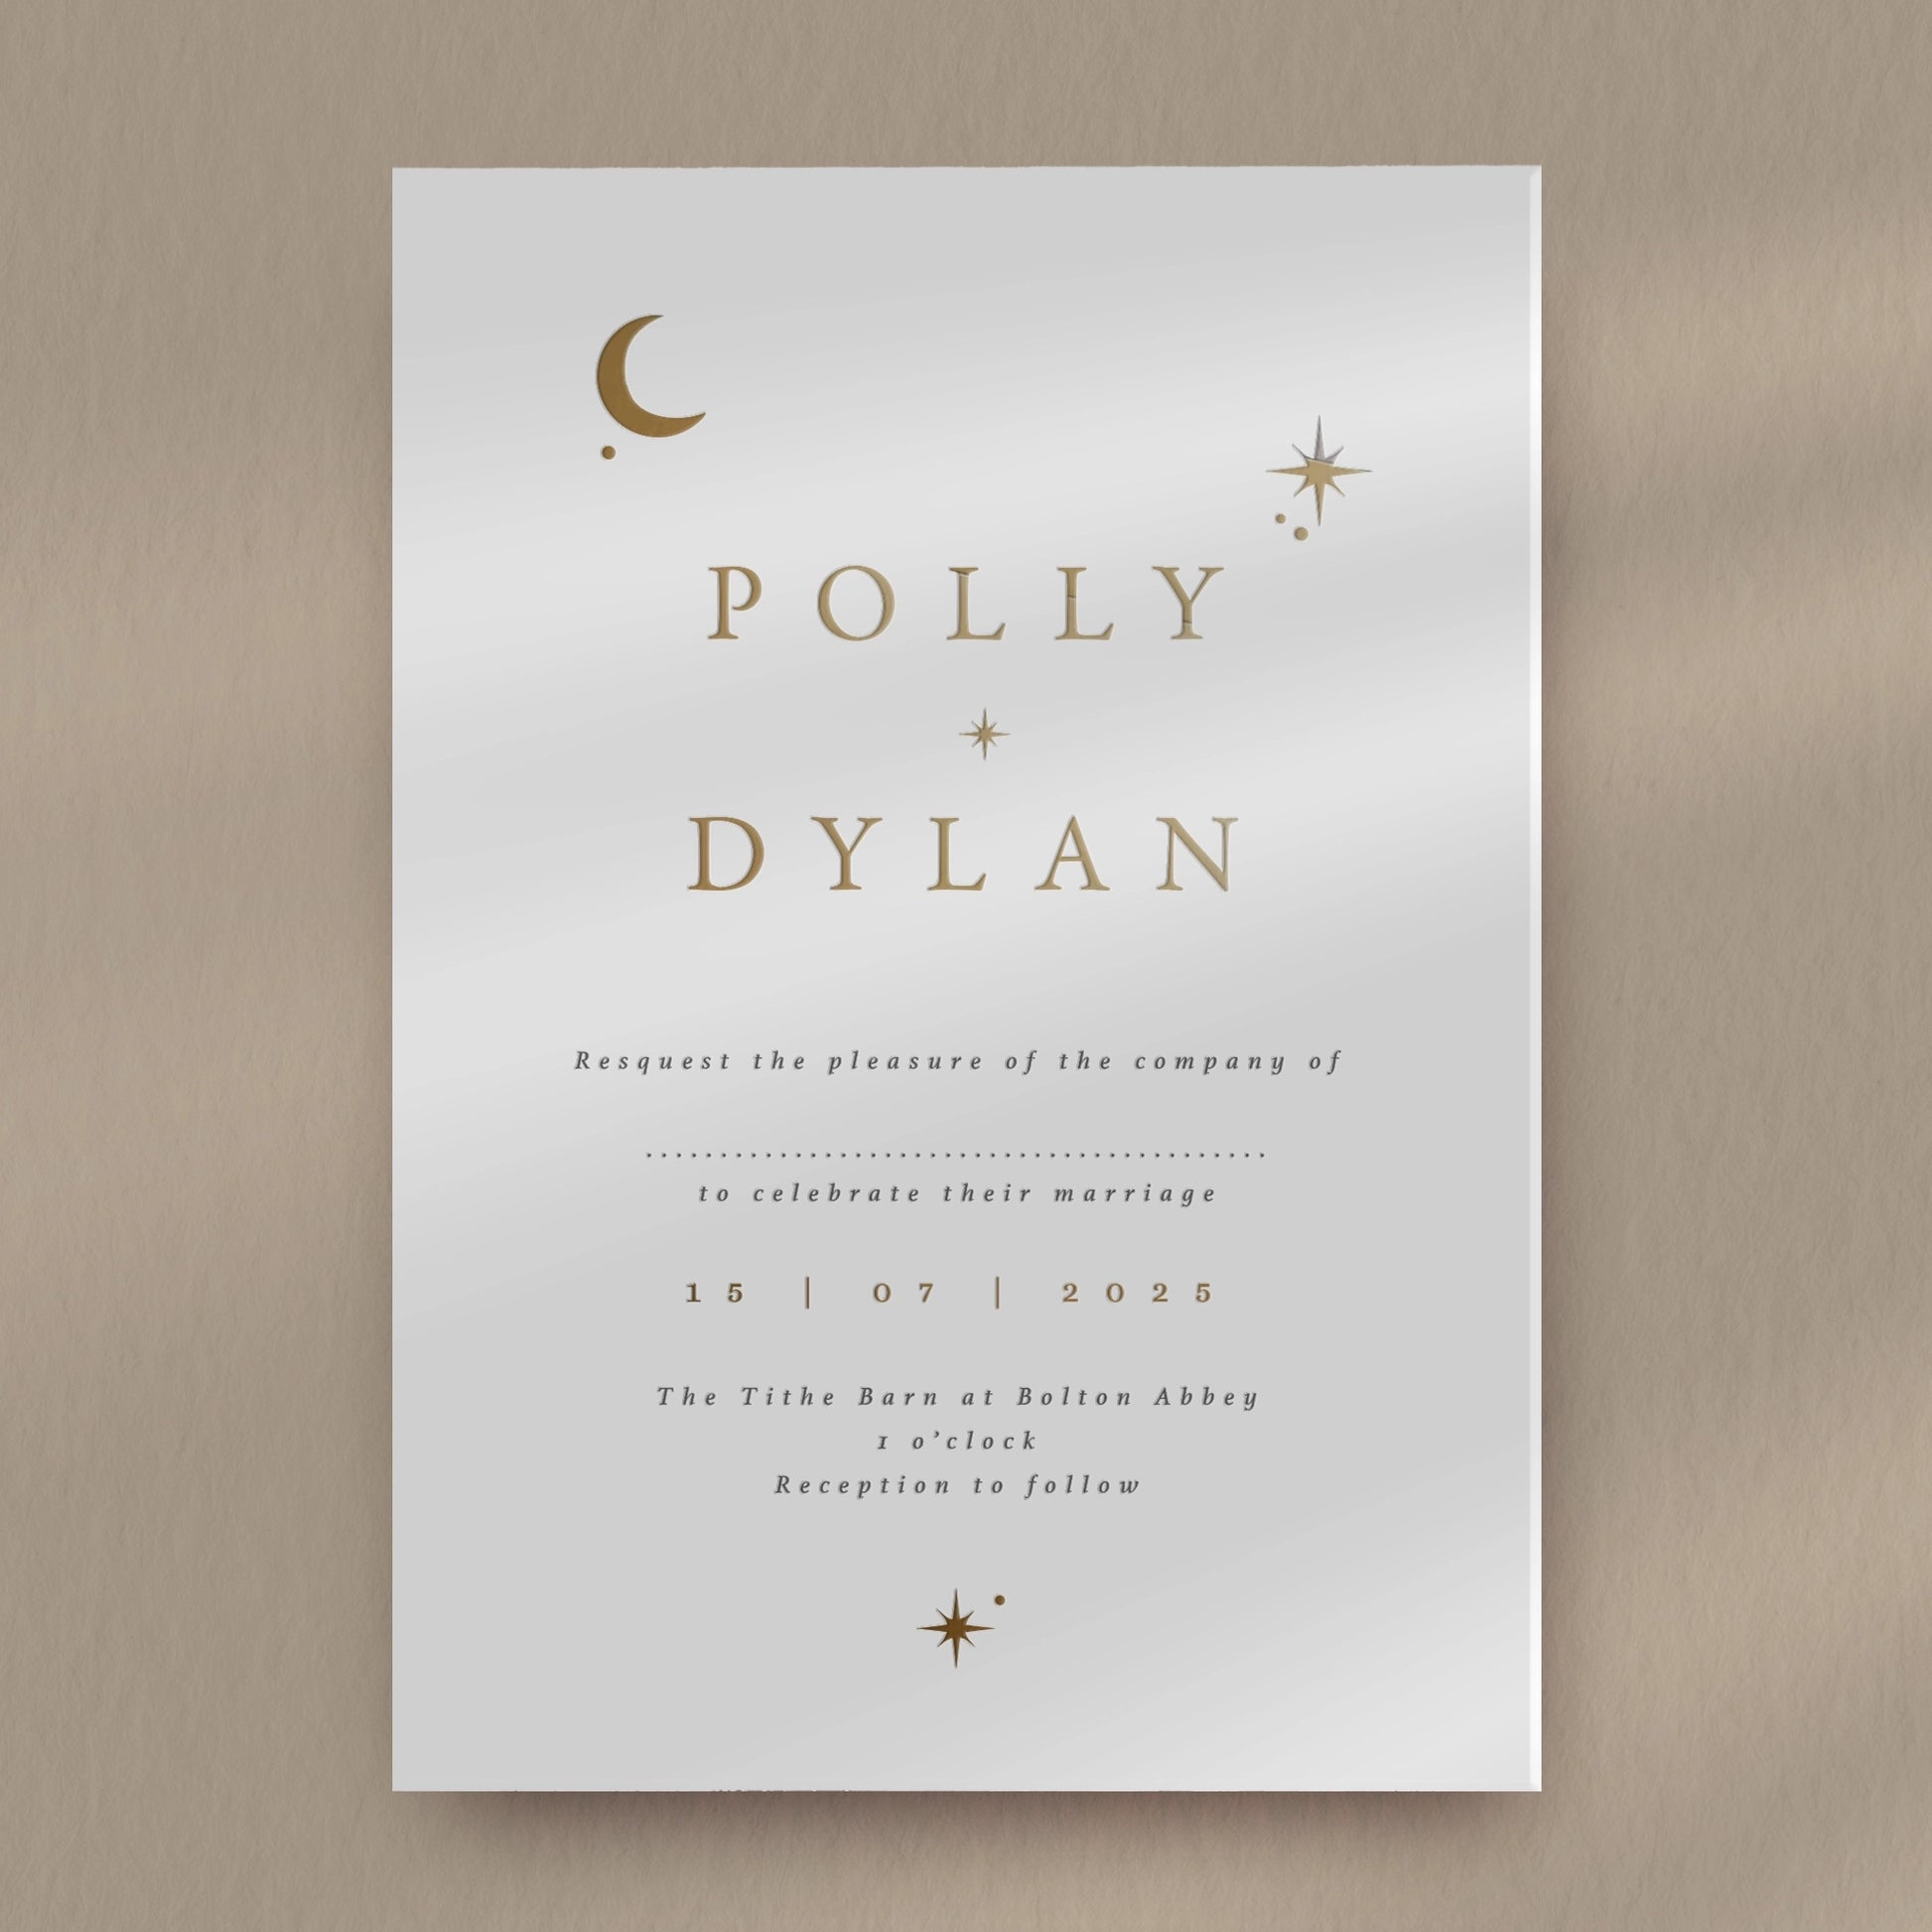 Day Invitation Sample  Ivy and Gold Wedding Stationery Polly  